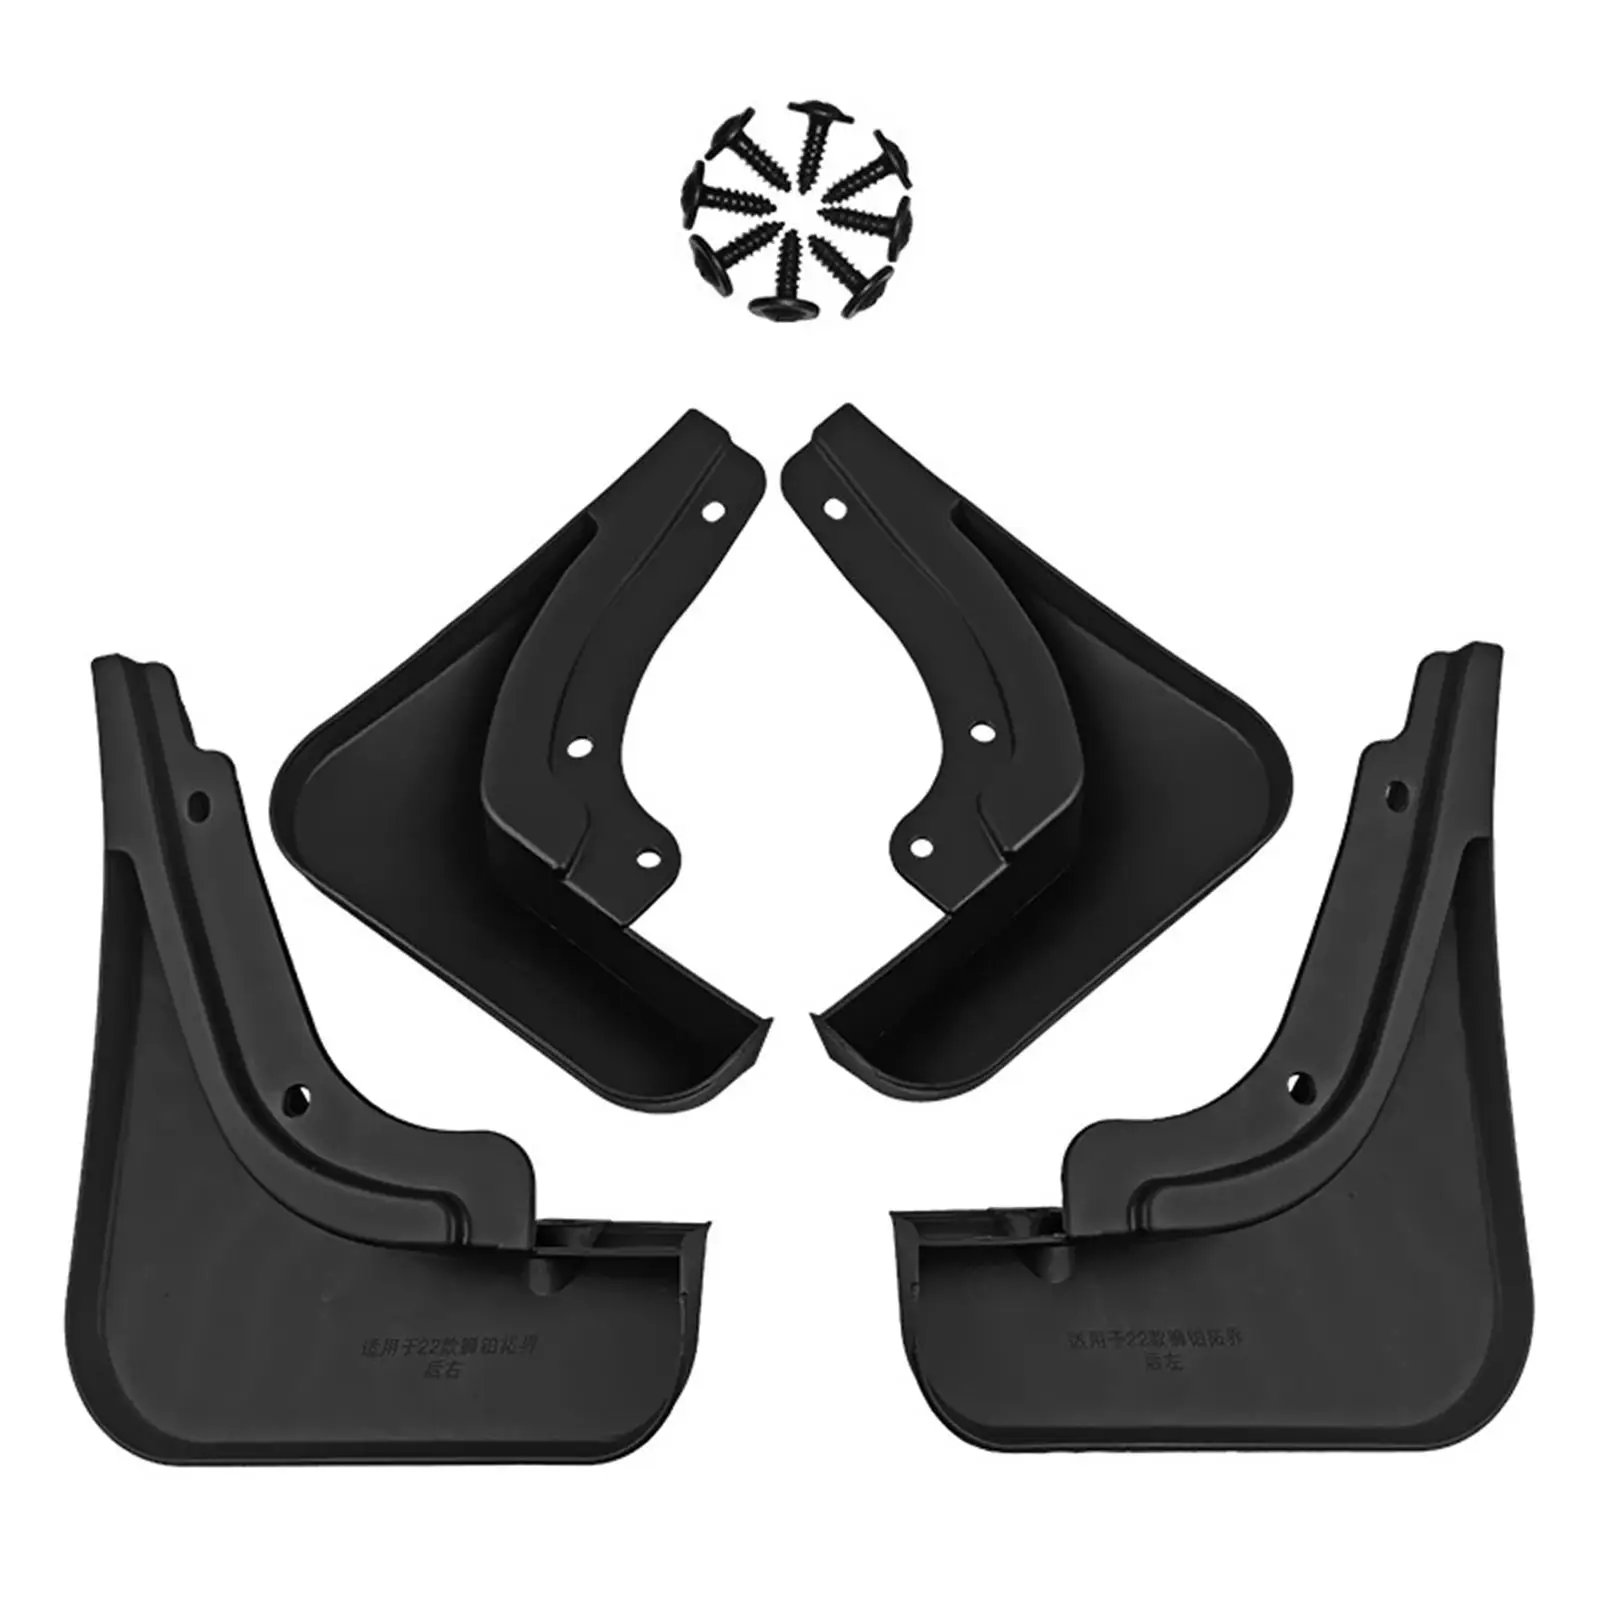 4 Pieces Front and Rear Mud Flaps Protection with Screws Mud Guards Mudguard for Kia Sportage Flexible Accessories Durable